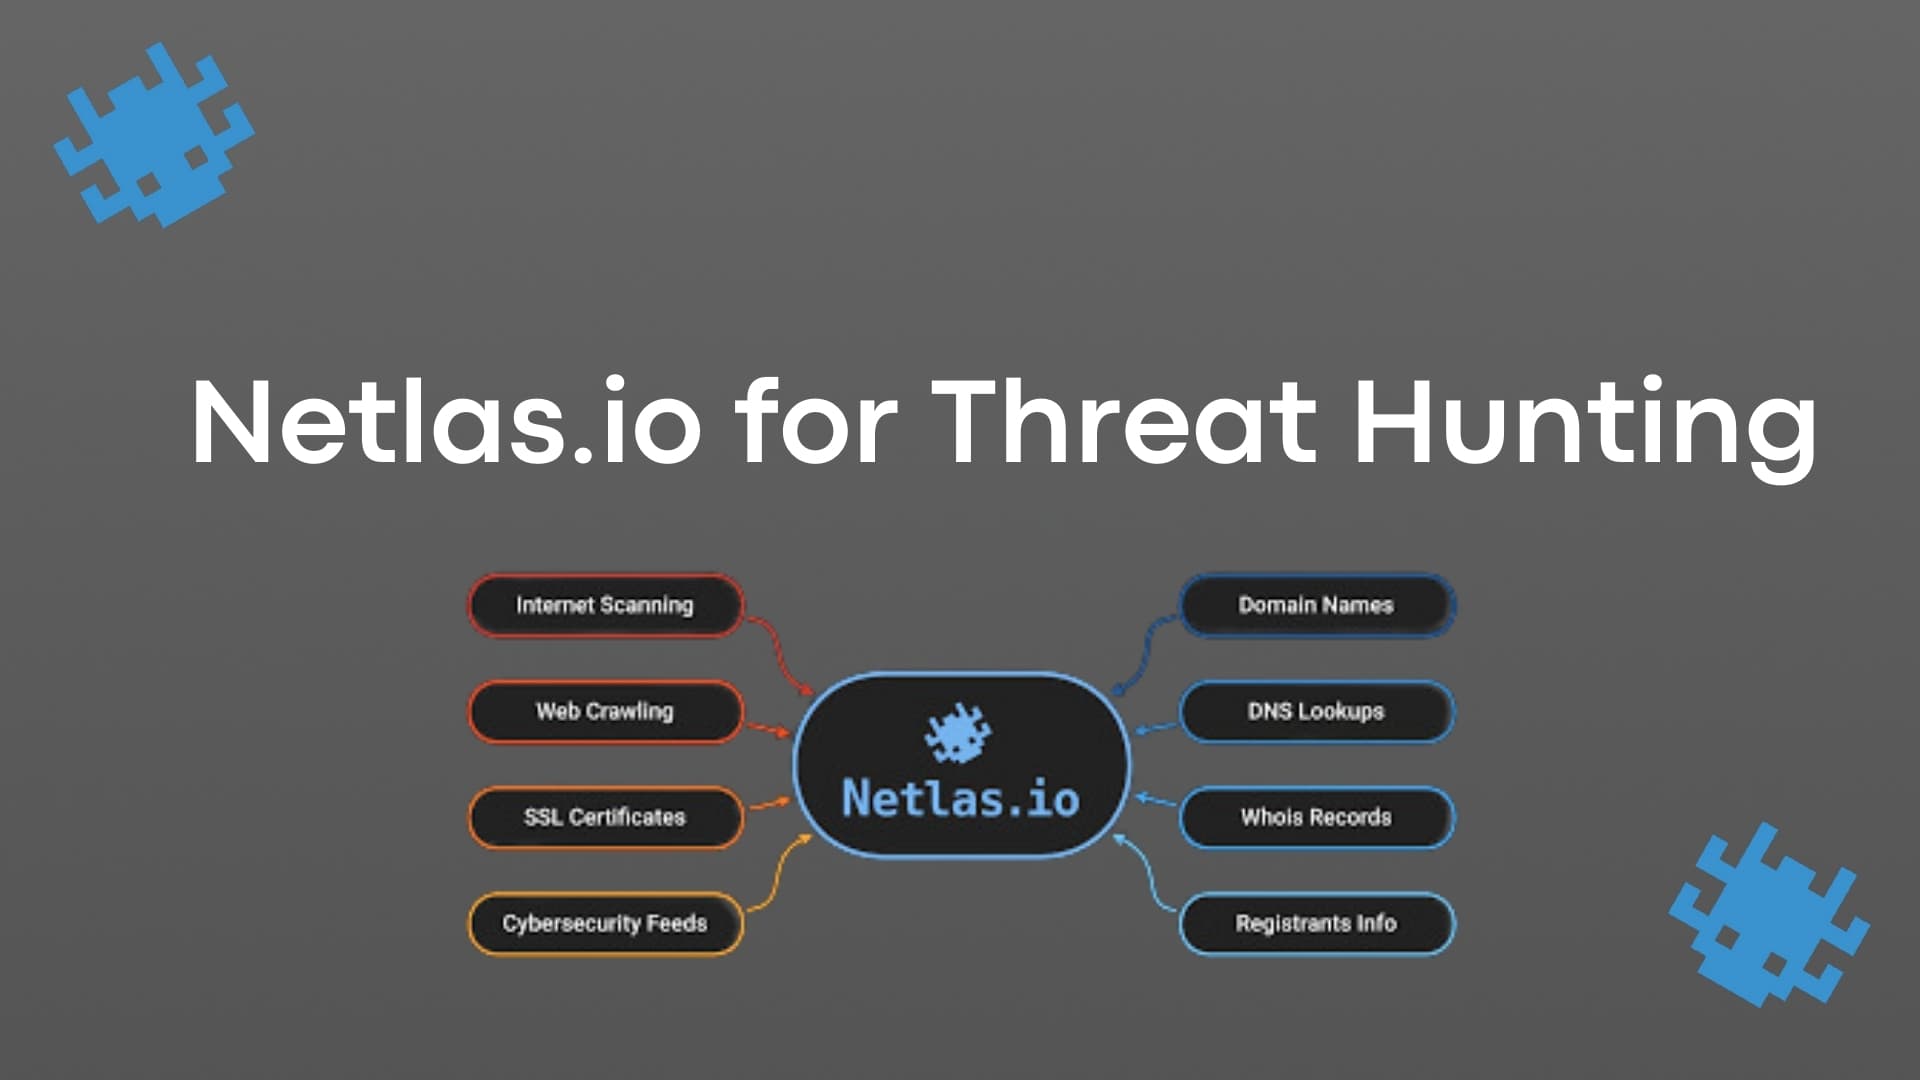 Netlas.io: A Powerful Suite of Tools for Threat Hunting